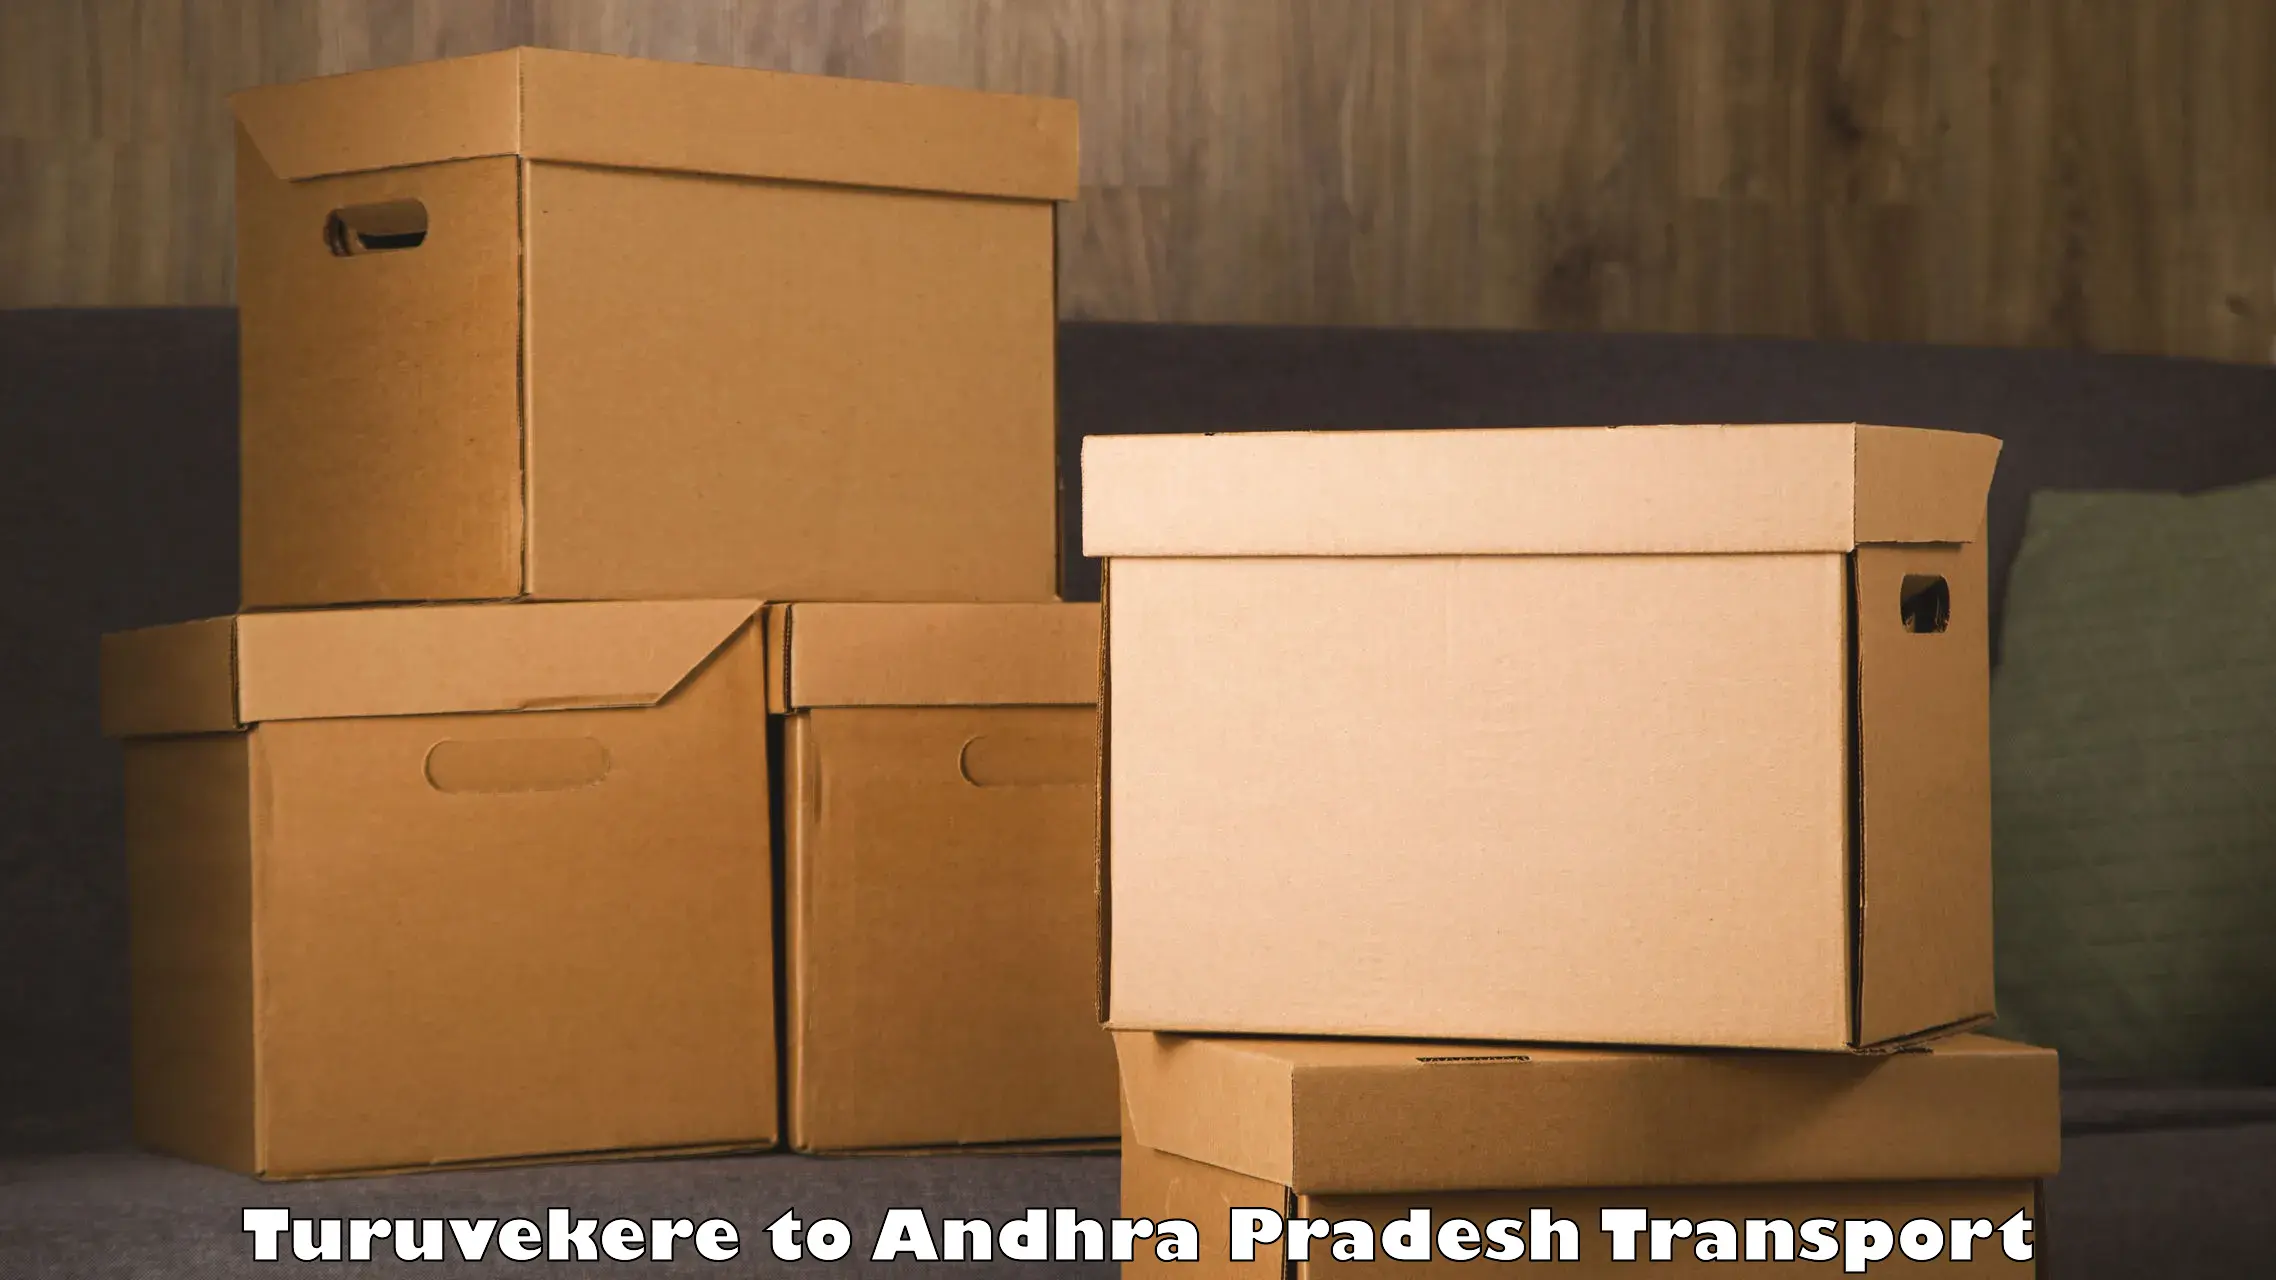 Part load transport service in India Turuvekere to Galiveedu